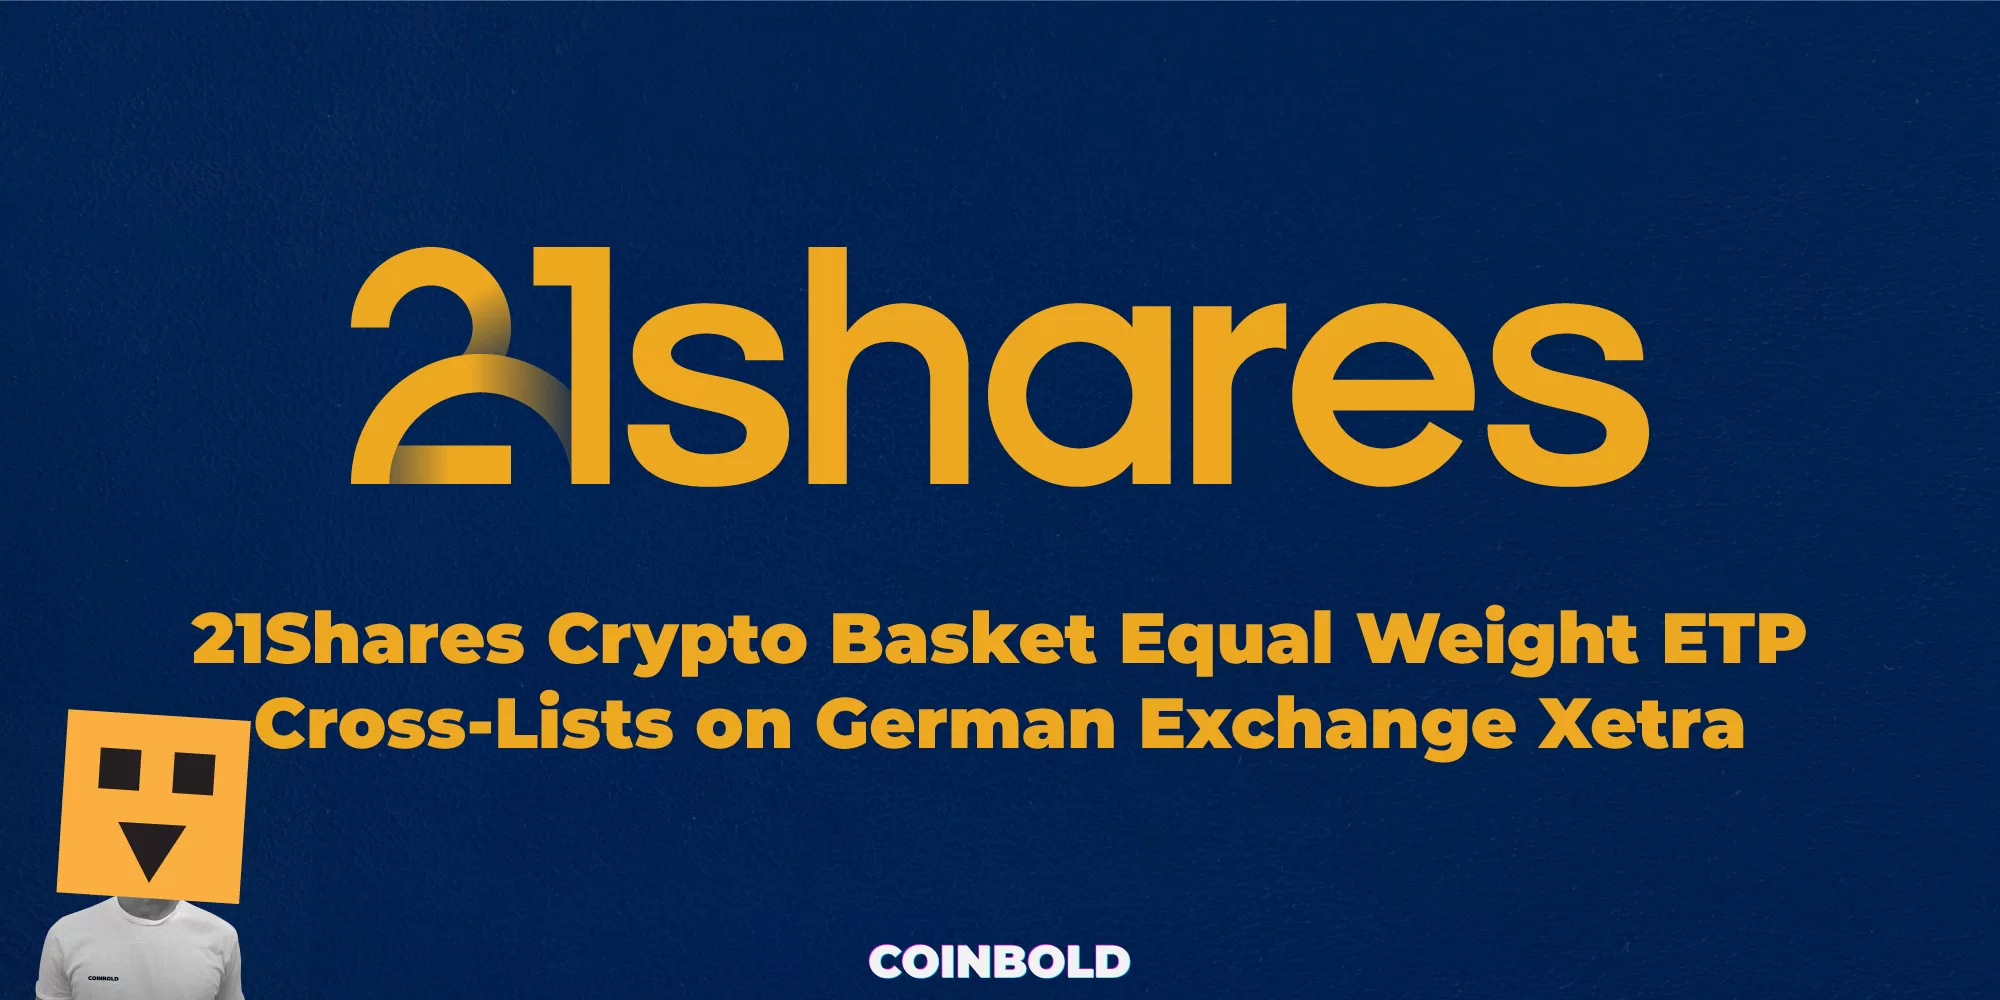 21Shares Crypto Basket Equal Weight ETP Cross-Lists on German Exchange Xetra